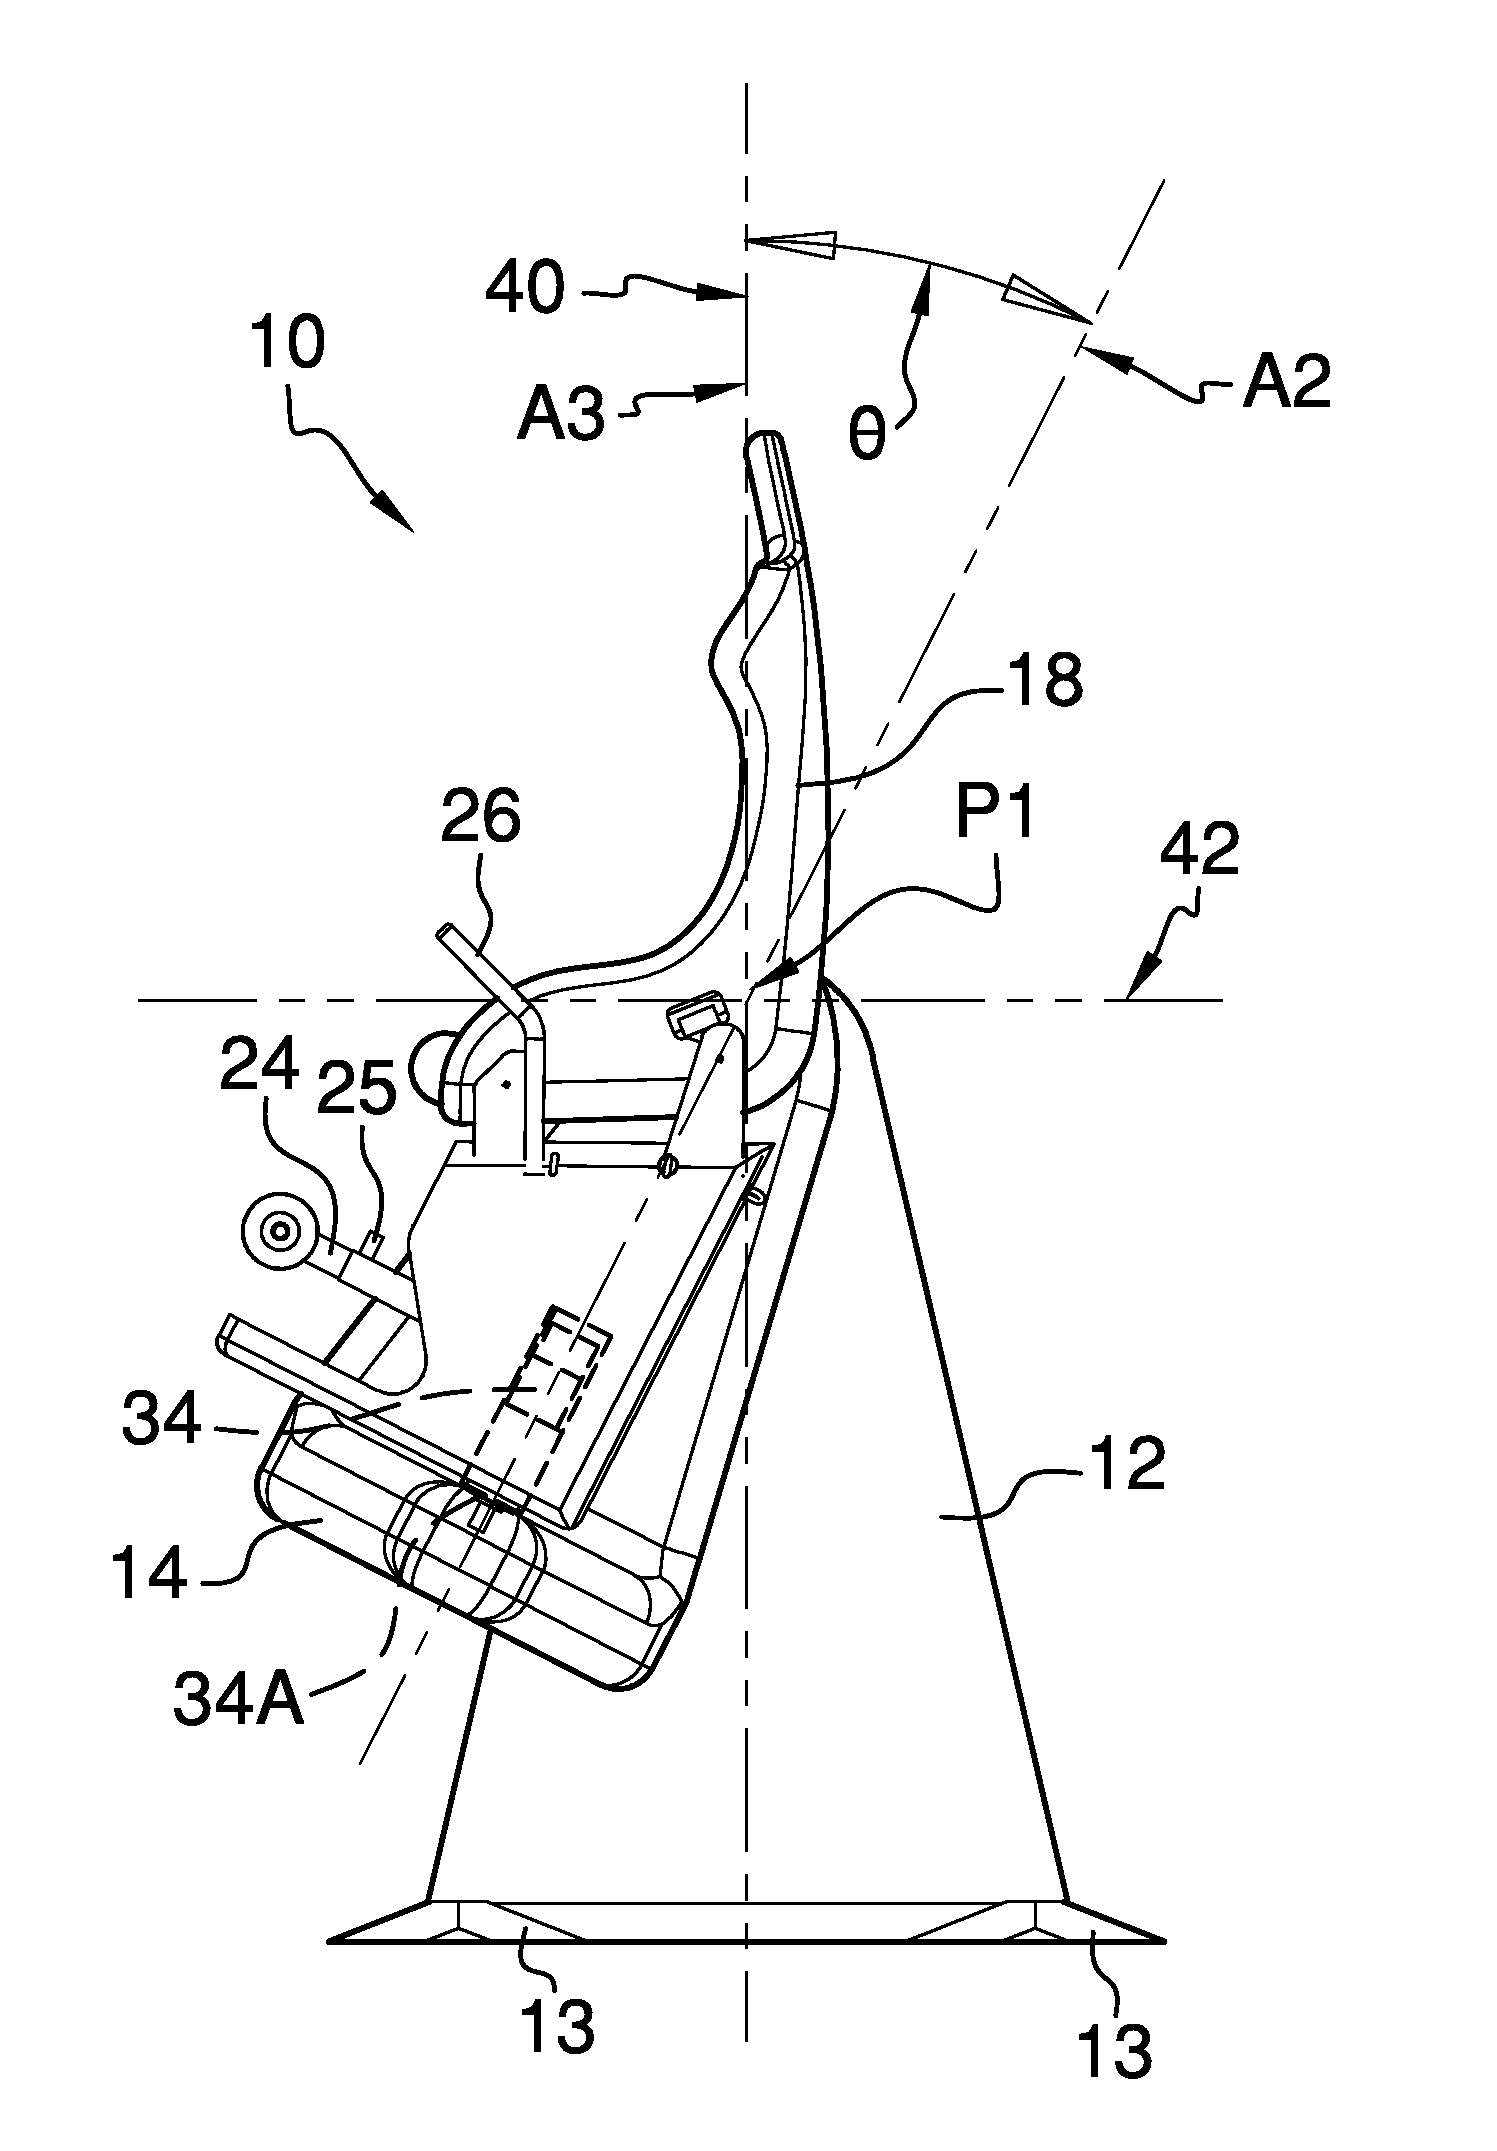 Patient positioning apparatus for examination and treatment and method of the same